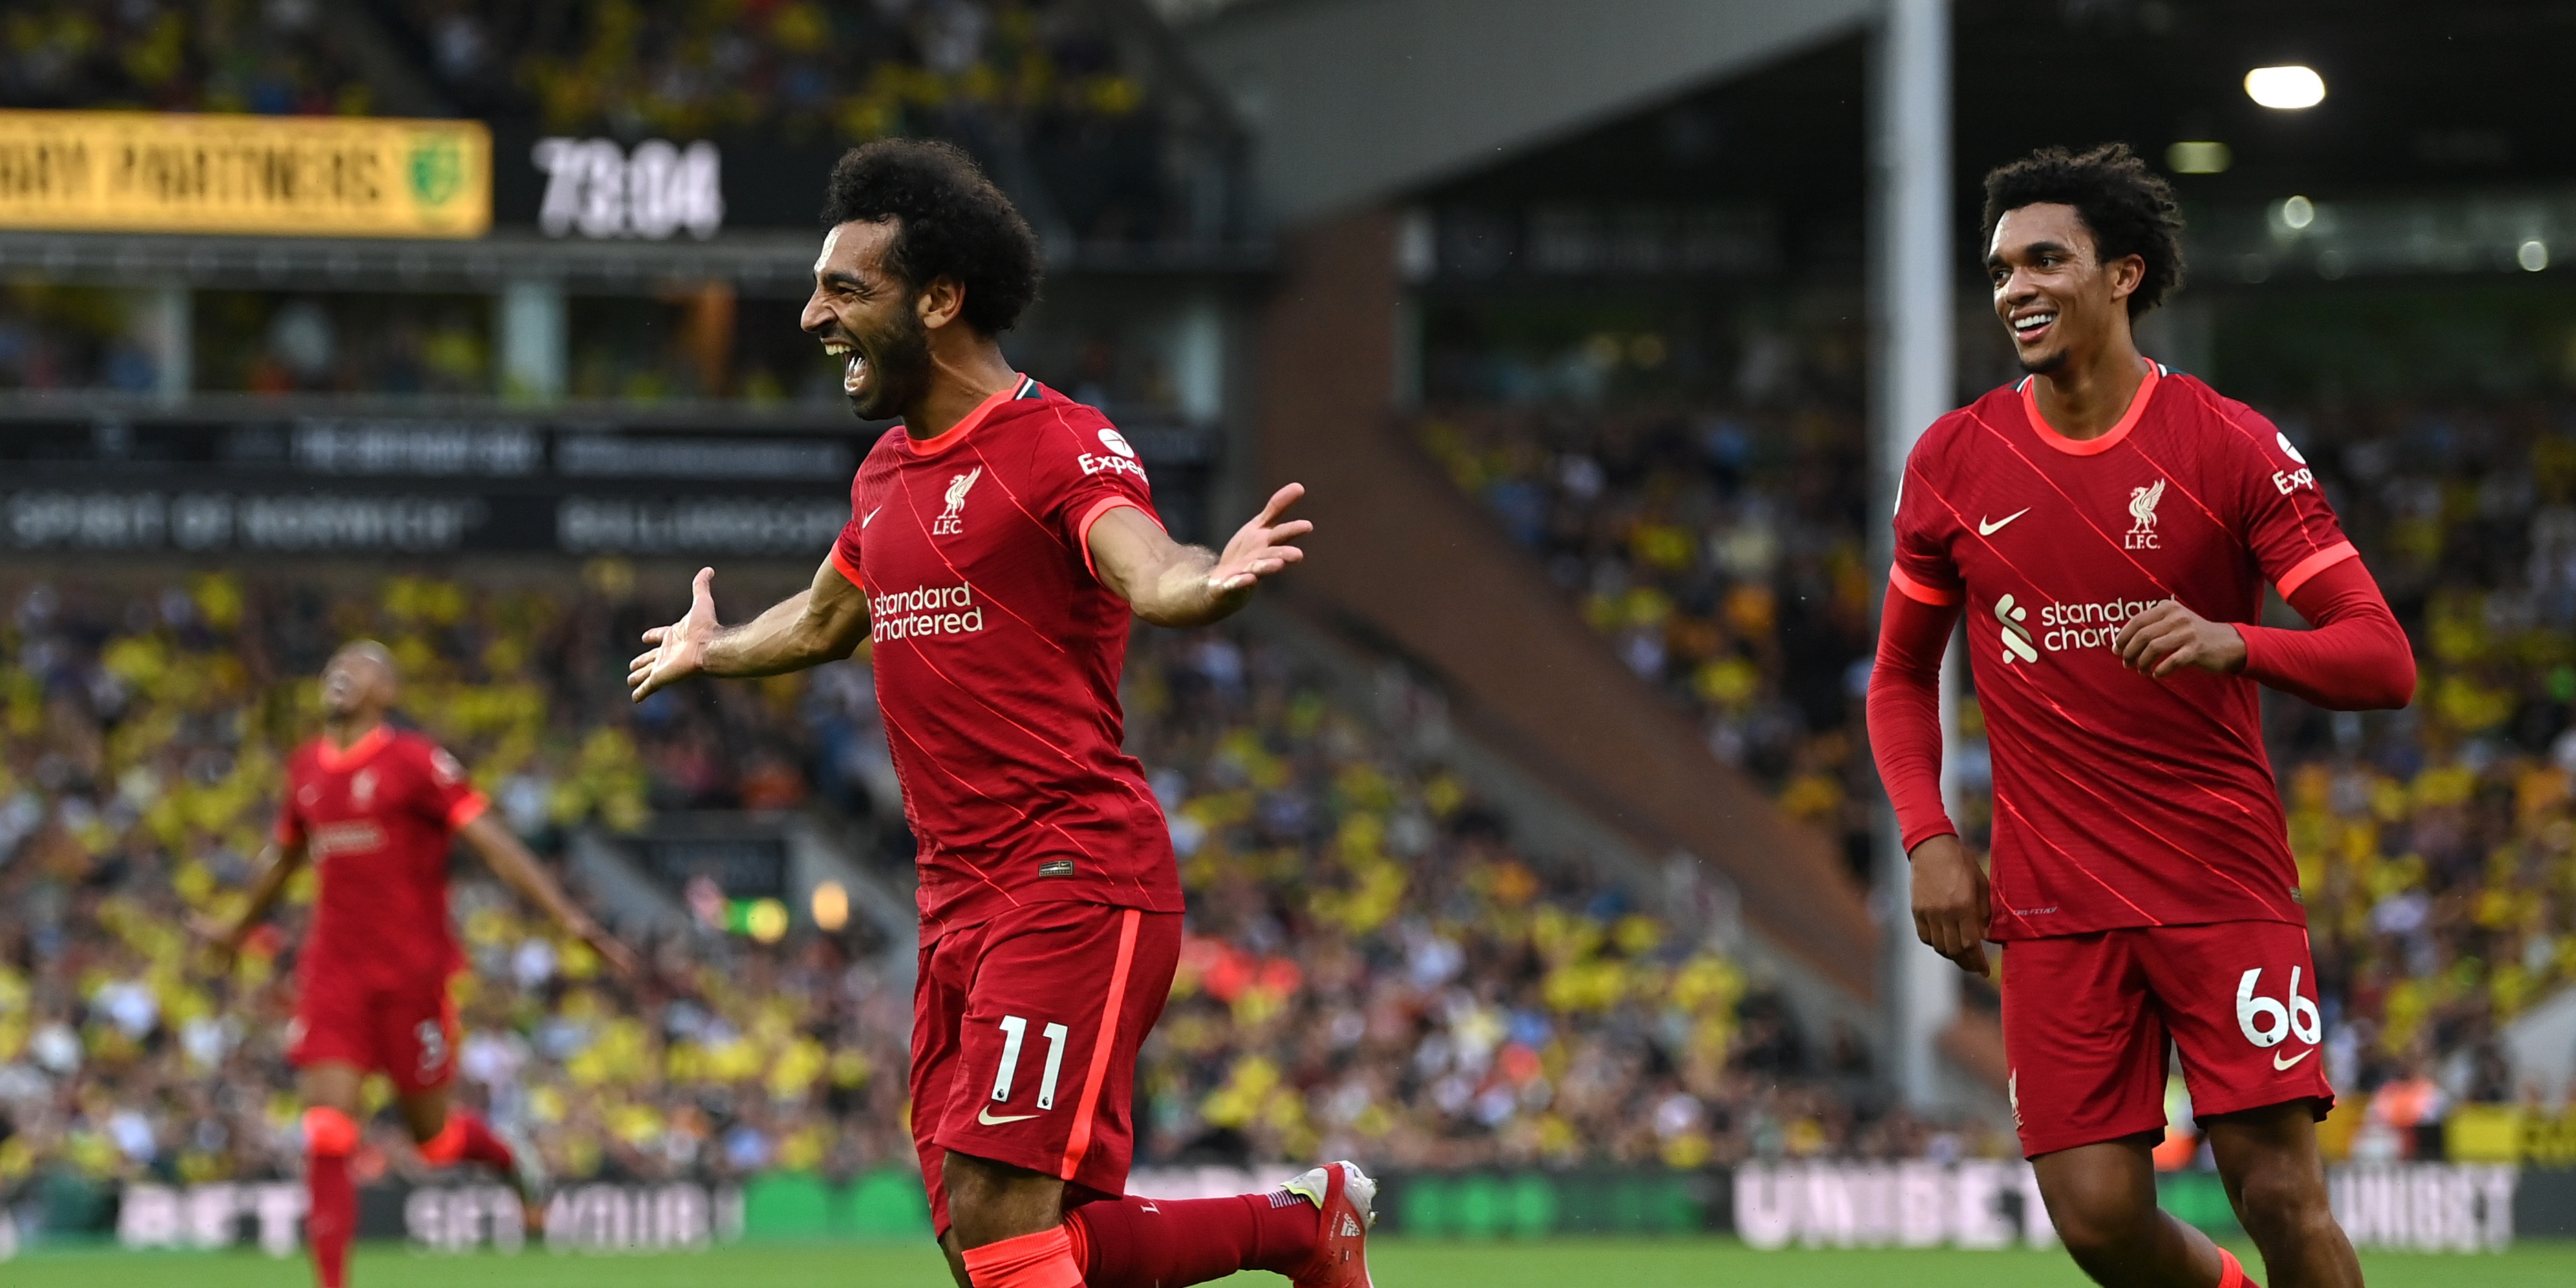 Mo Salah’s eye-watering wage demands revealed by reliable journalist Chris Bascombe